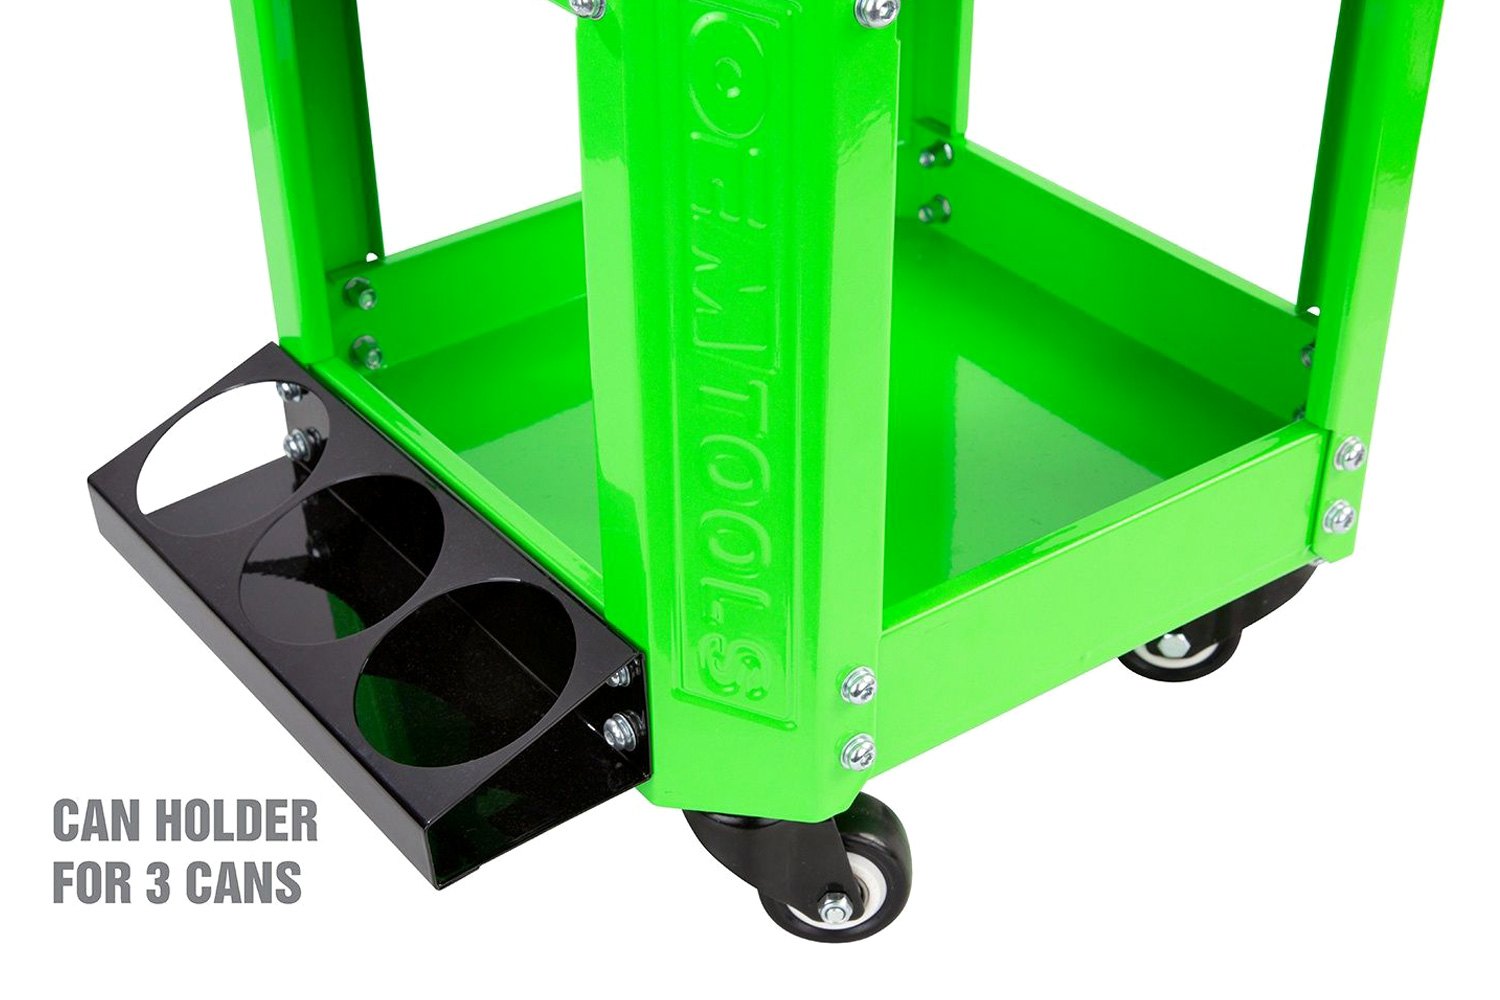 OEMTOOL 24993 Green Rolling Workshop Creeper Seat with 2 Tool Storage Drawers Under Seat Storage Can Holders 